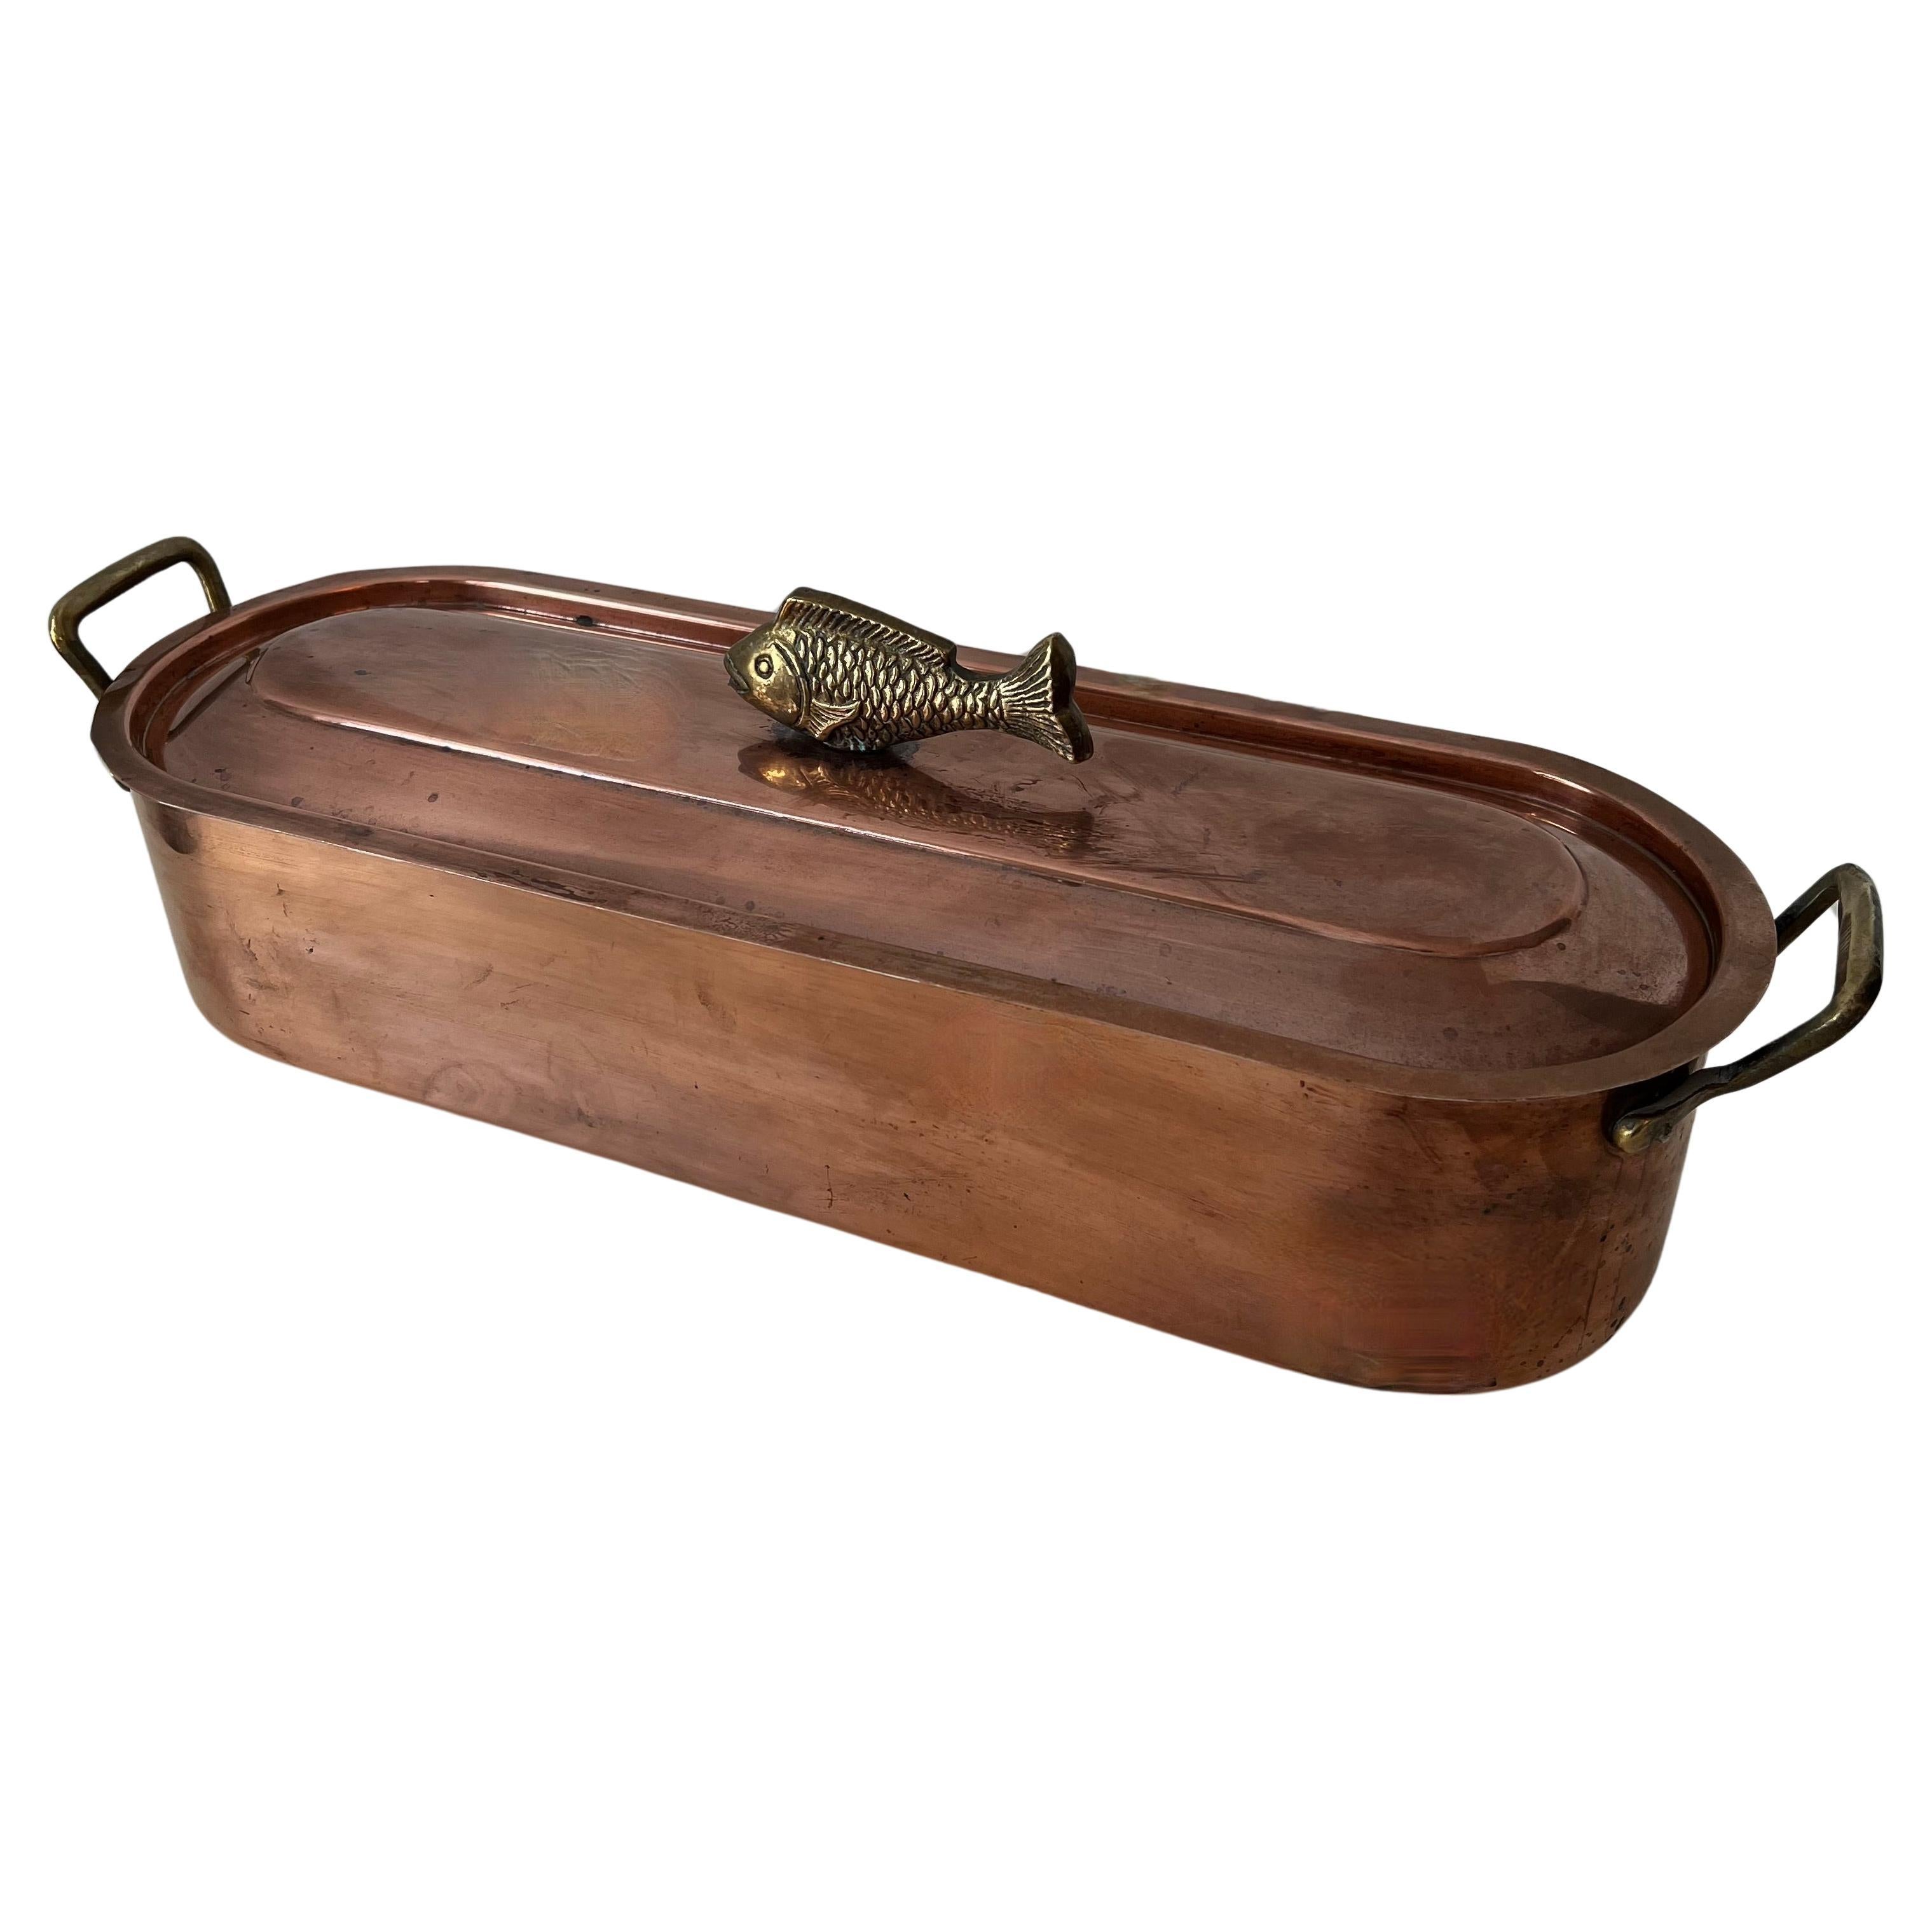 A Copper fish Poacher with Stainless interior removable Rack for your favorite Fish!  The tops removable lid, has a decorative 3-d Fish handle.

A compliment to the kitchen as a practical and functional piece, however just as beautiful as a